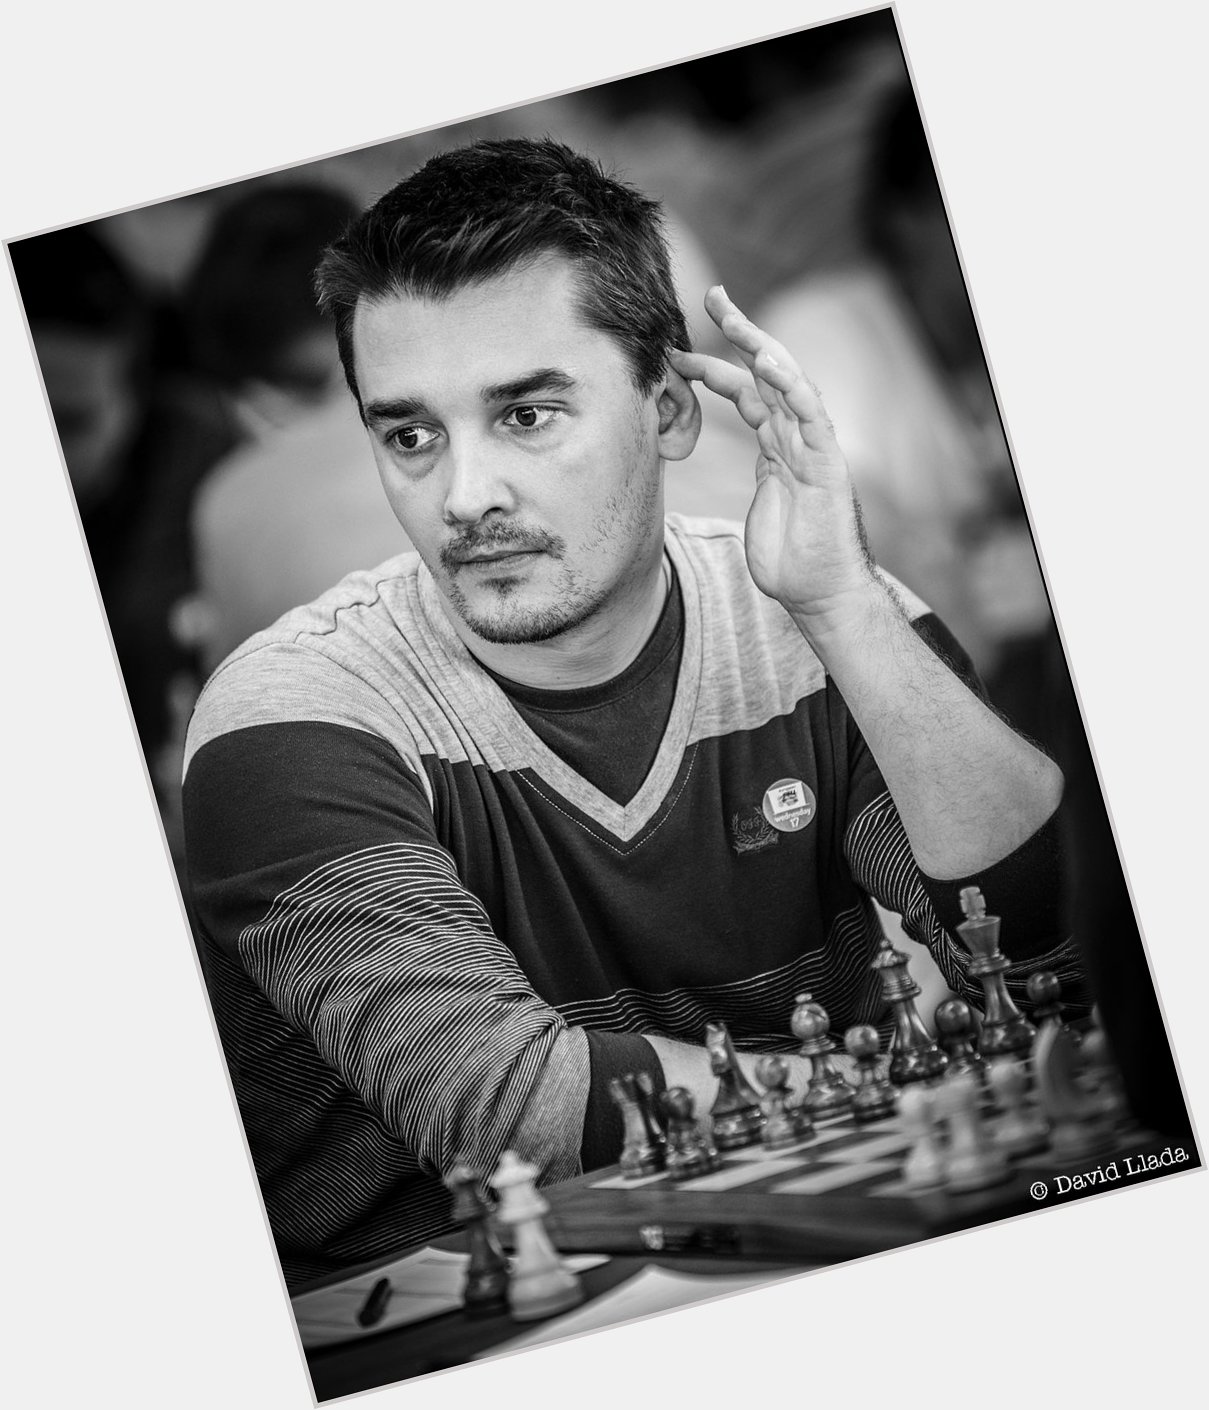 Happy birthday to one of my favorite chess players, Alexander Morozevich, who turns 41 today! 